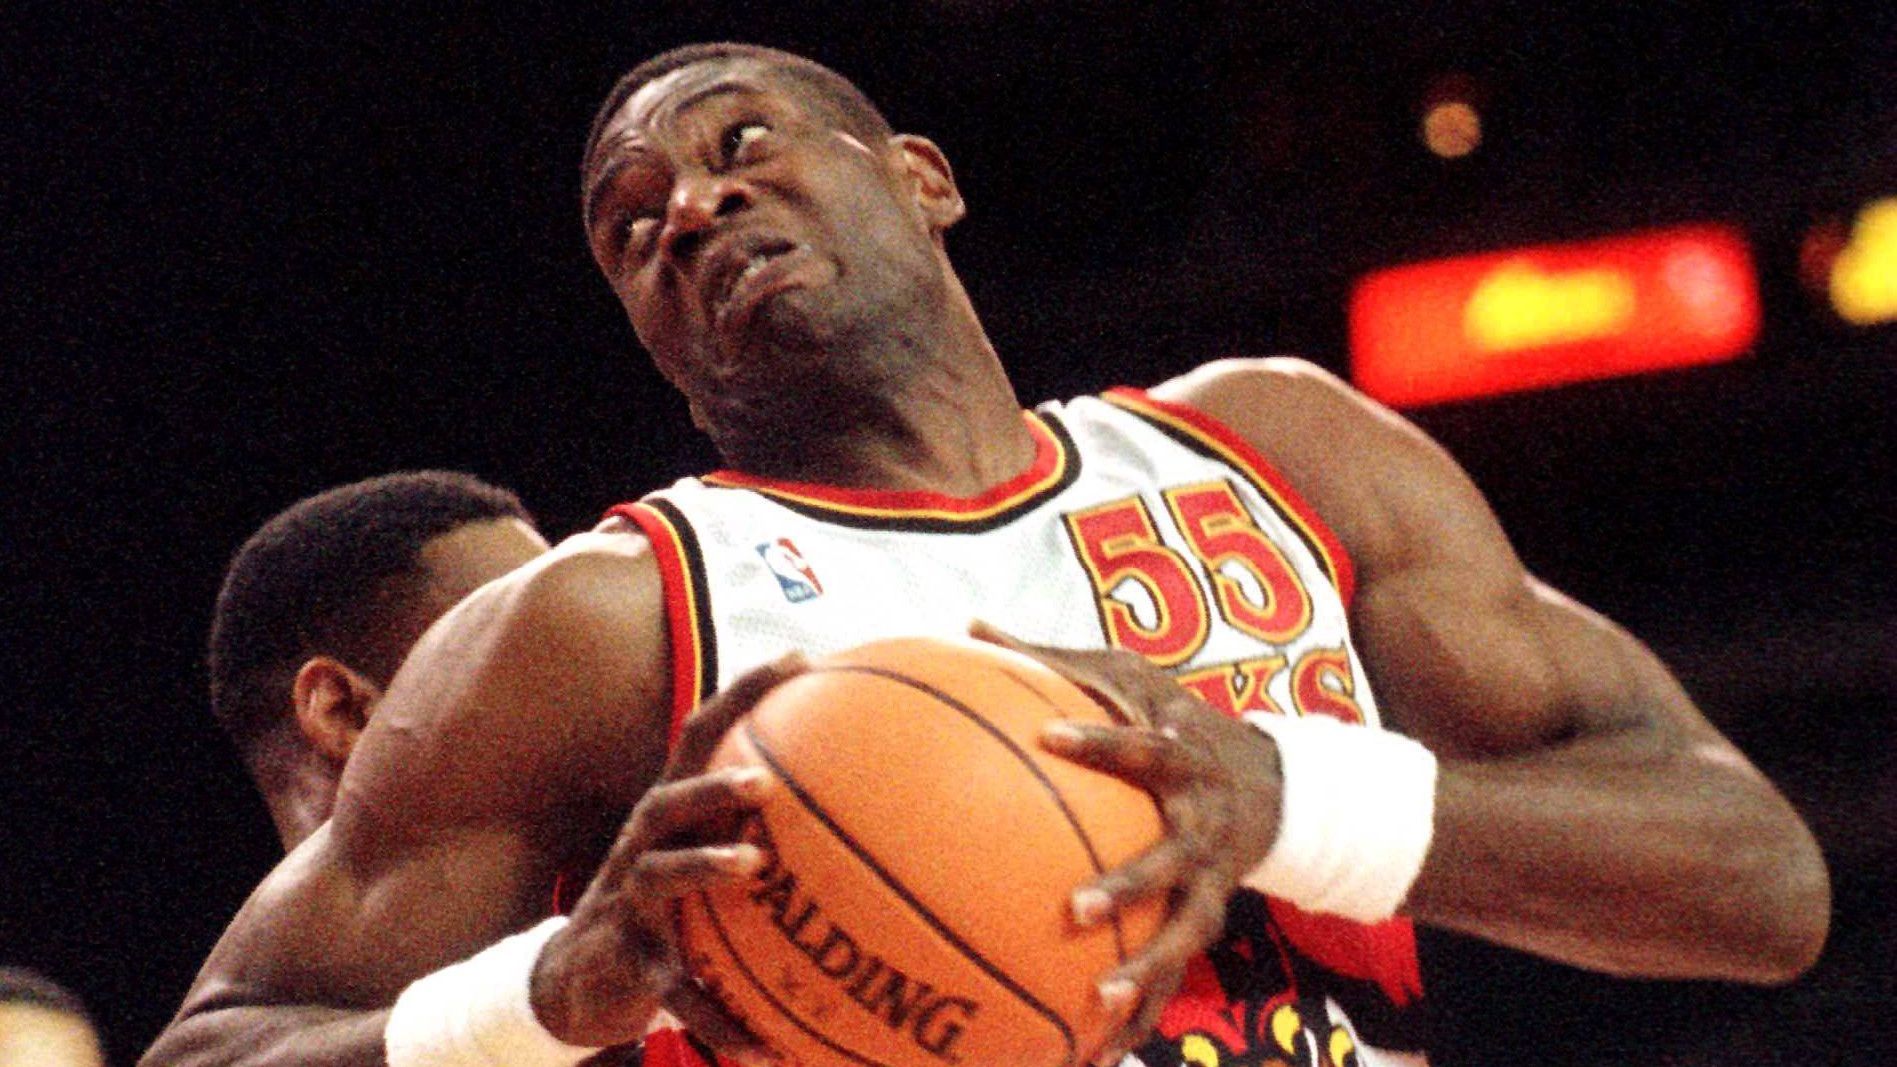 <strong>Defensive Player of the Year: Dikembe Mutombo (geteilt) - 4</strong><br>Jahre und Teams: 1995 (Denver Nuggets), 1997, 1998 (Atlanta Hawks), 2001 (Philadelphia 76ers)